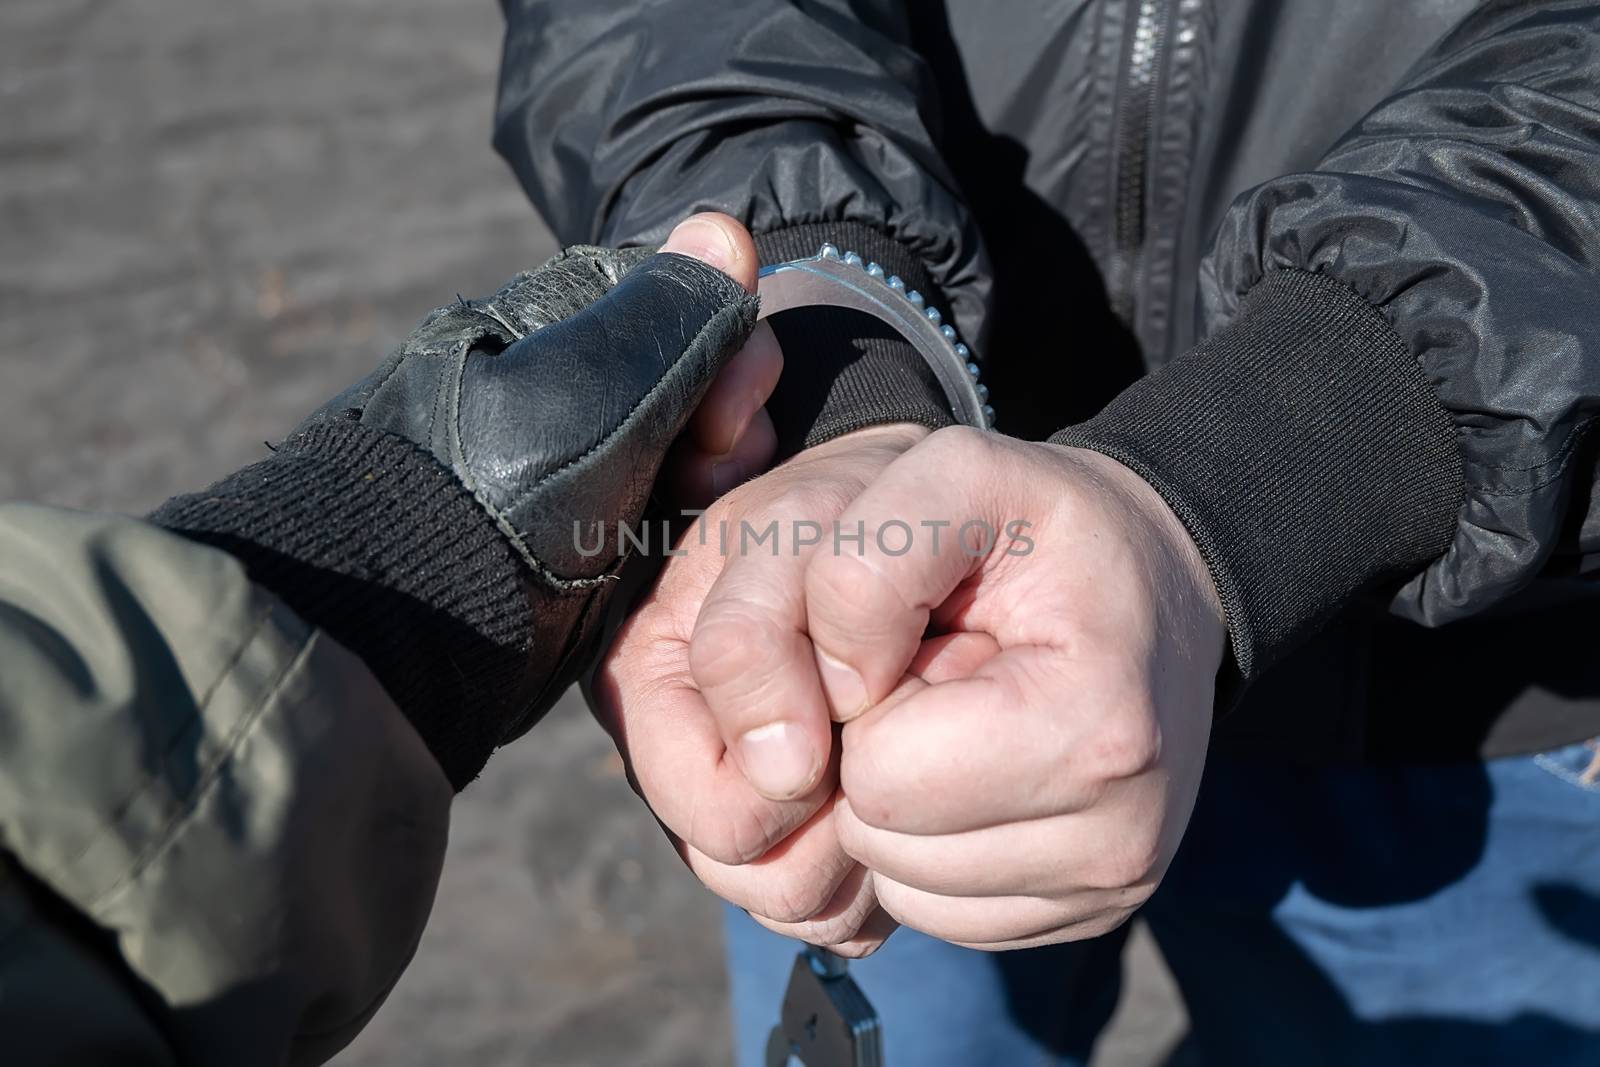 arrest of a criminal, a police officer puts handcuffs on the hands of a bandit by jk3030